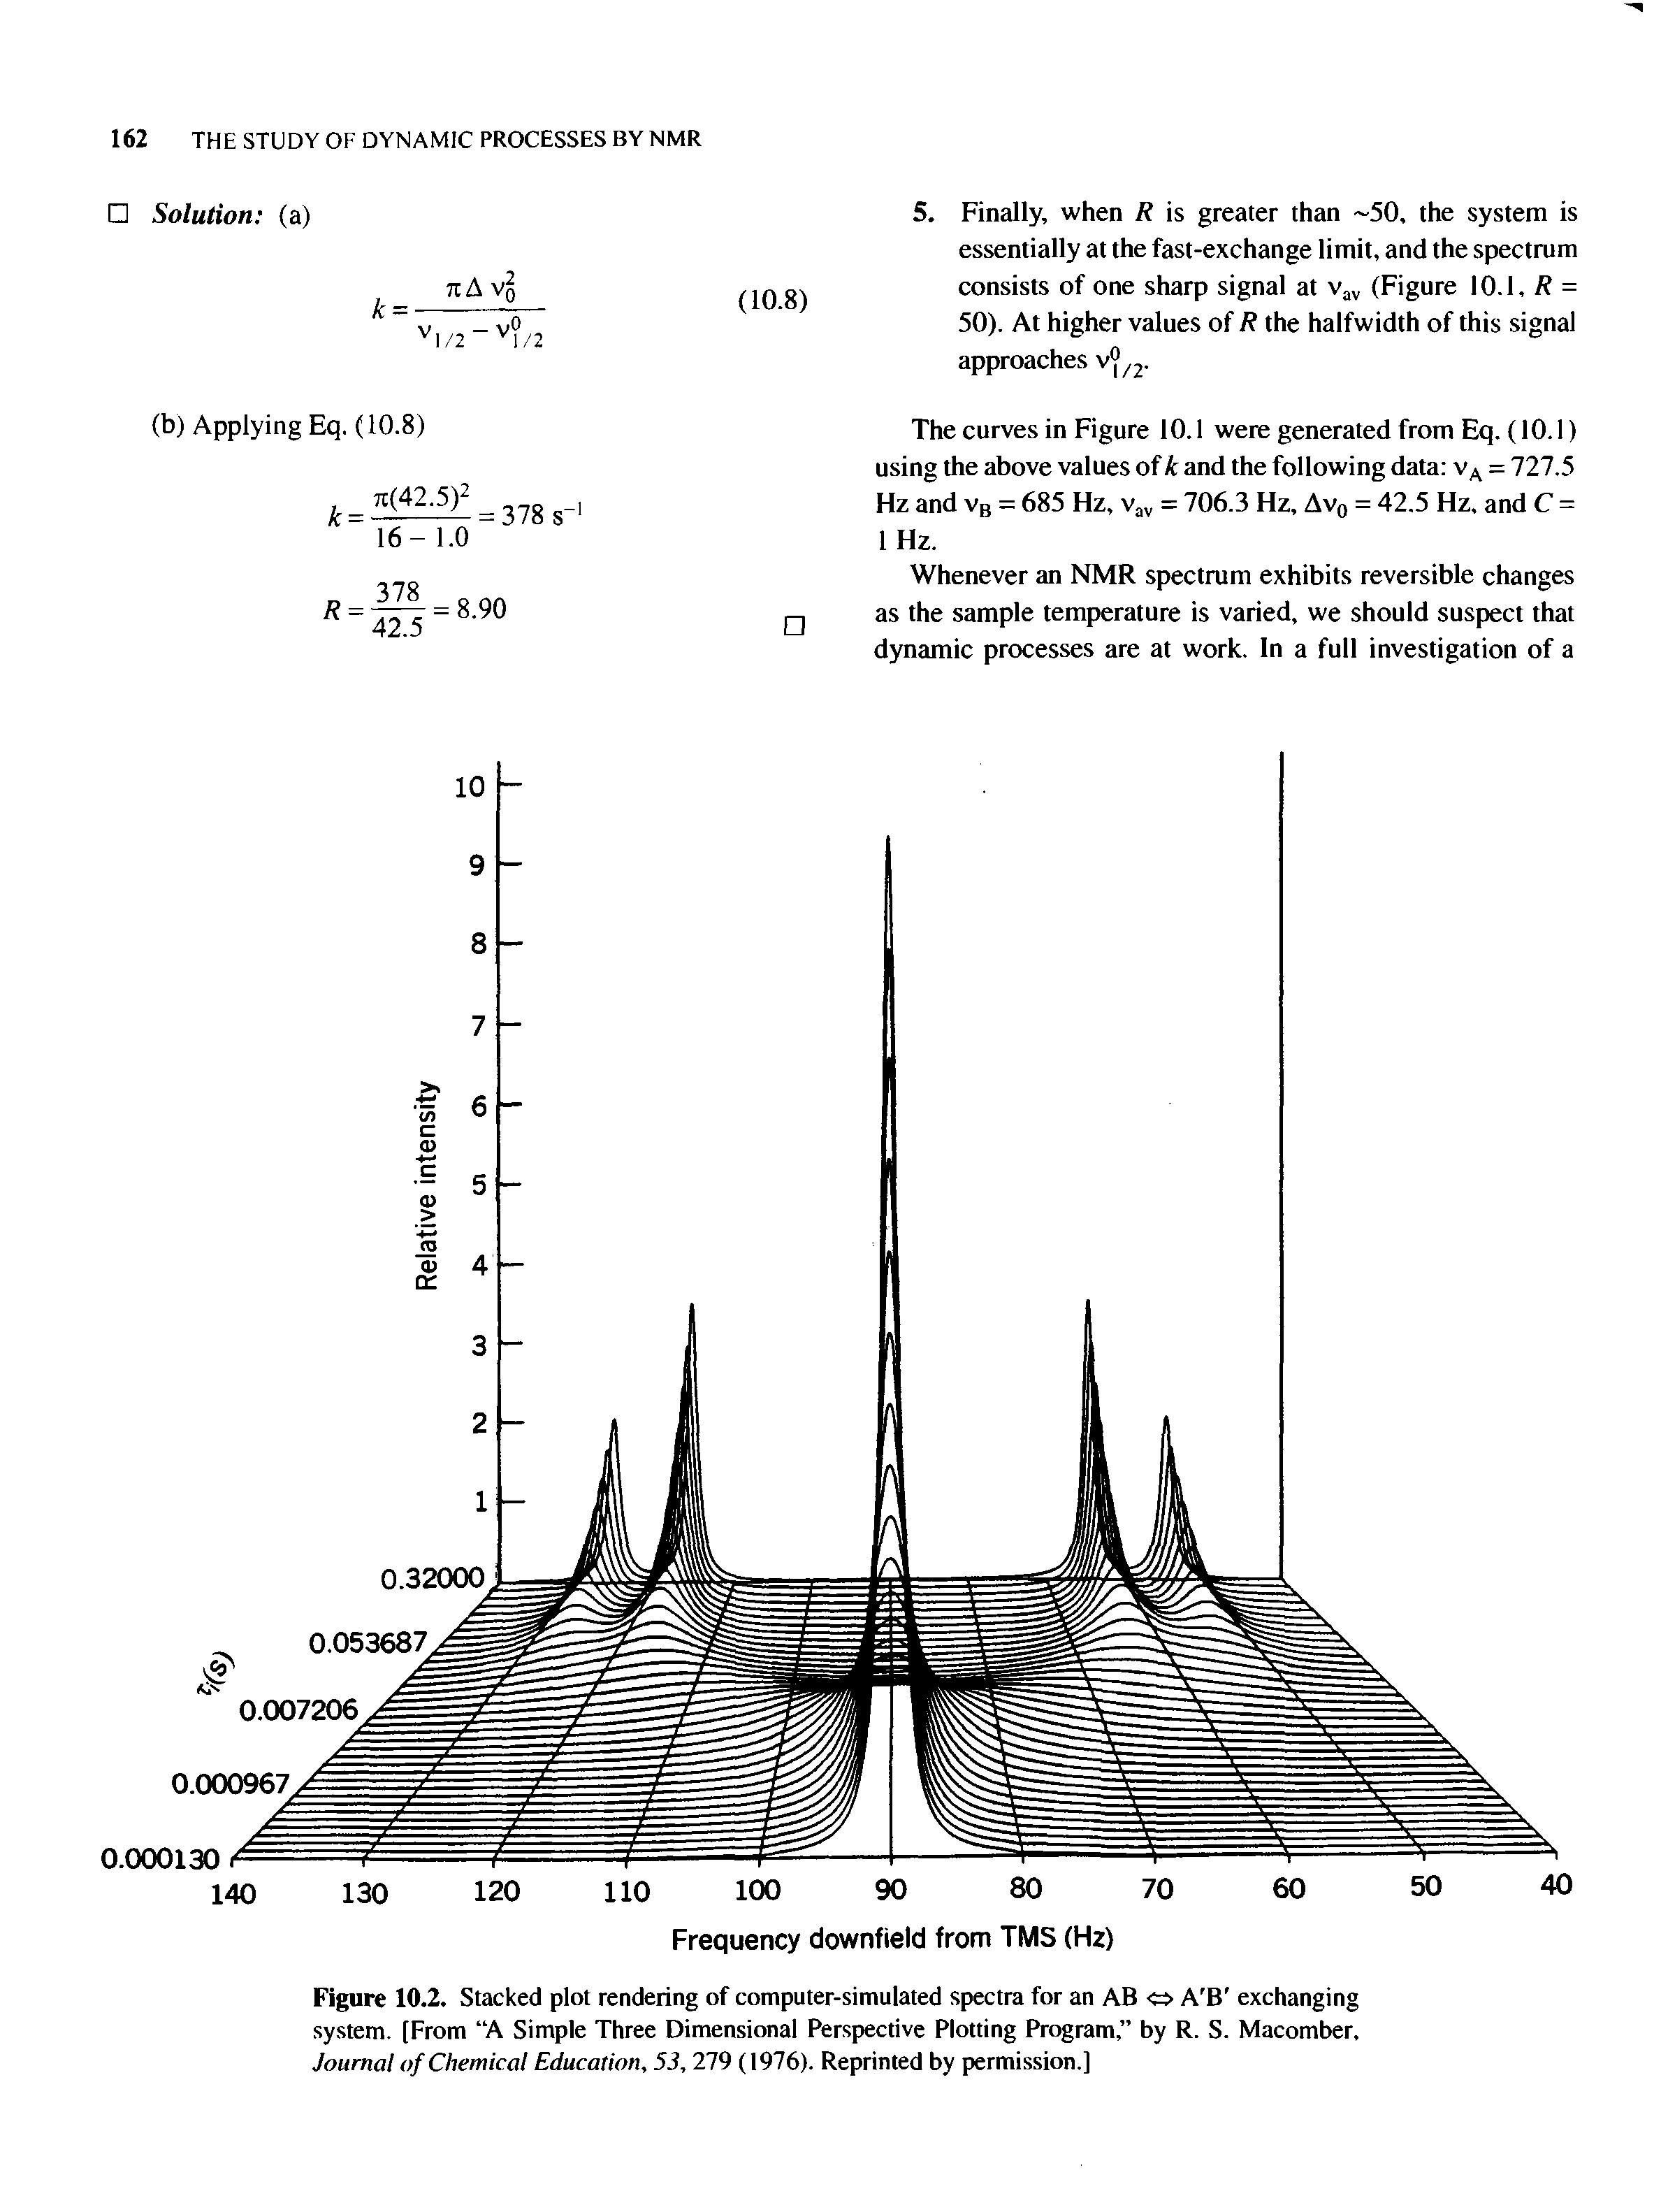 Figure 10.2. Stacked plot rendering of computer-simulated spectra for an AB <=> A B exchanging system. [From A Simple Three Dimensional Perspective Plotting Program, by R. S. Macomber, Journal of Chemical Education, 53, 279 (1976). Reprinted by permission.]...